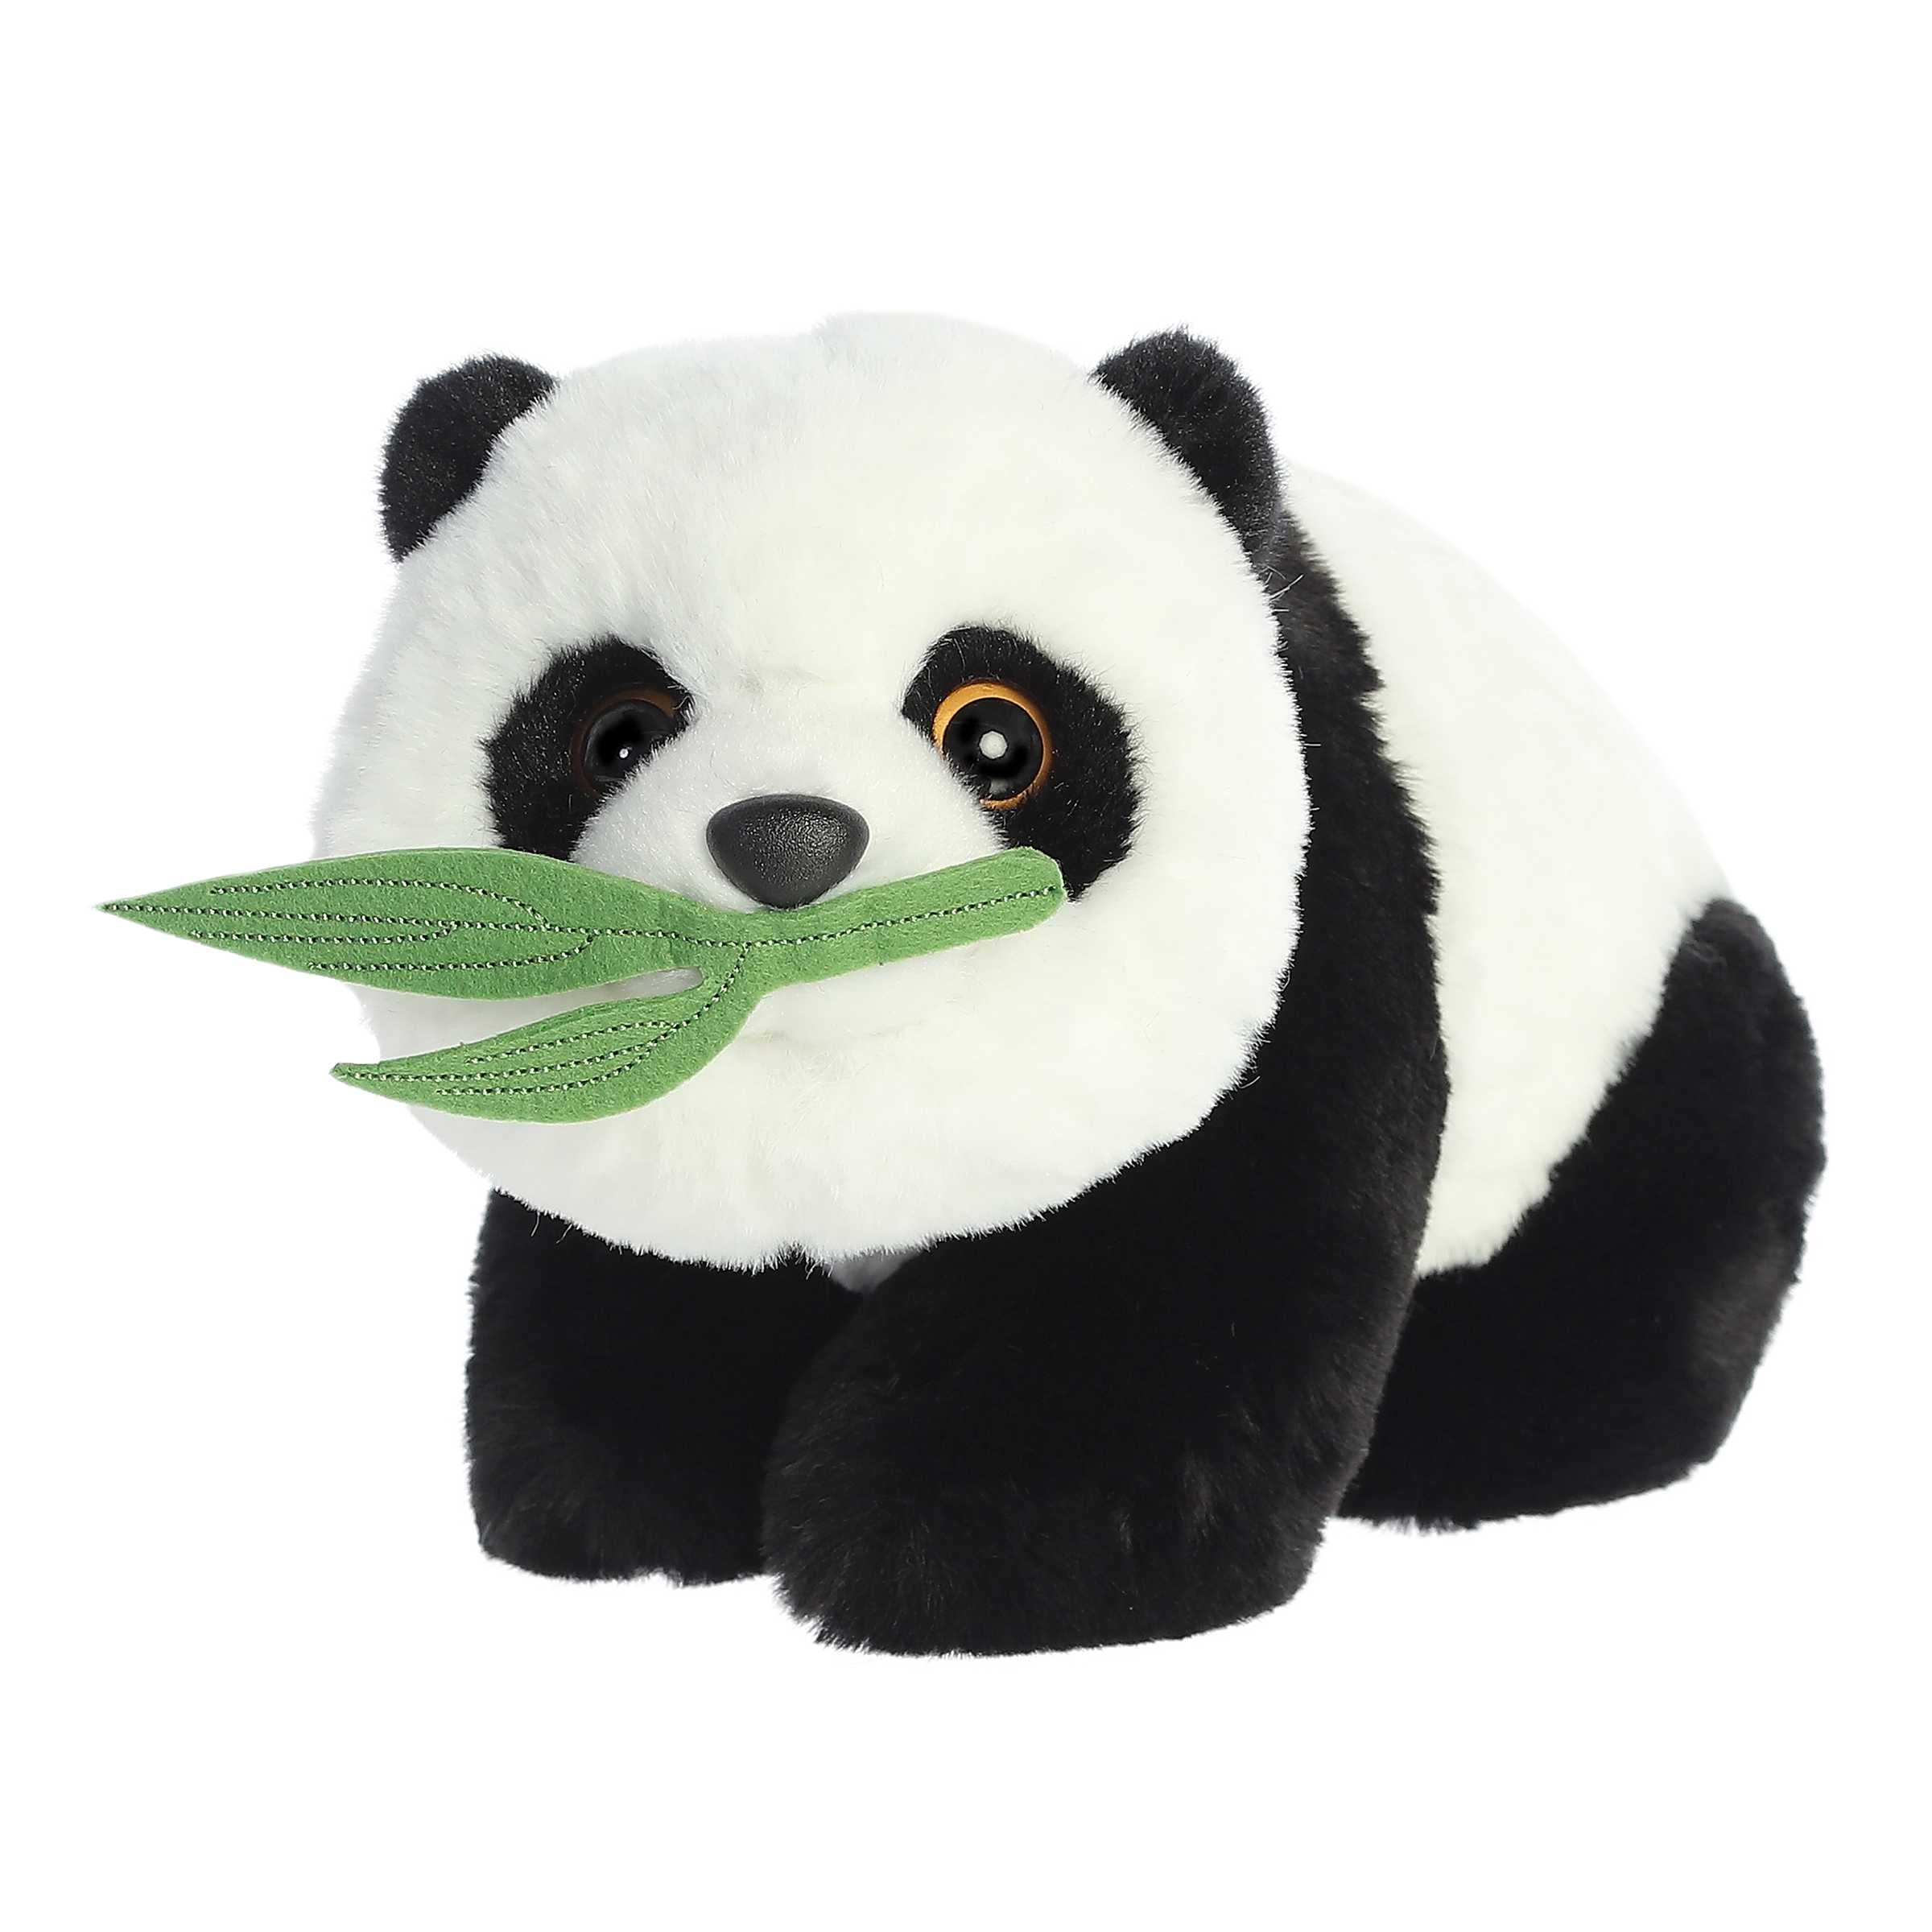 Adorable panda Stuffed animals with black and white soft fur, green leaf attached to its mouth, and black fur around eyes.